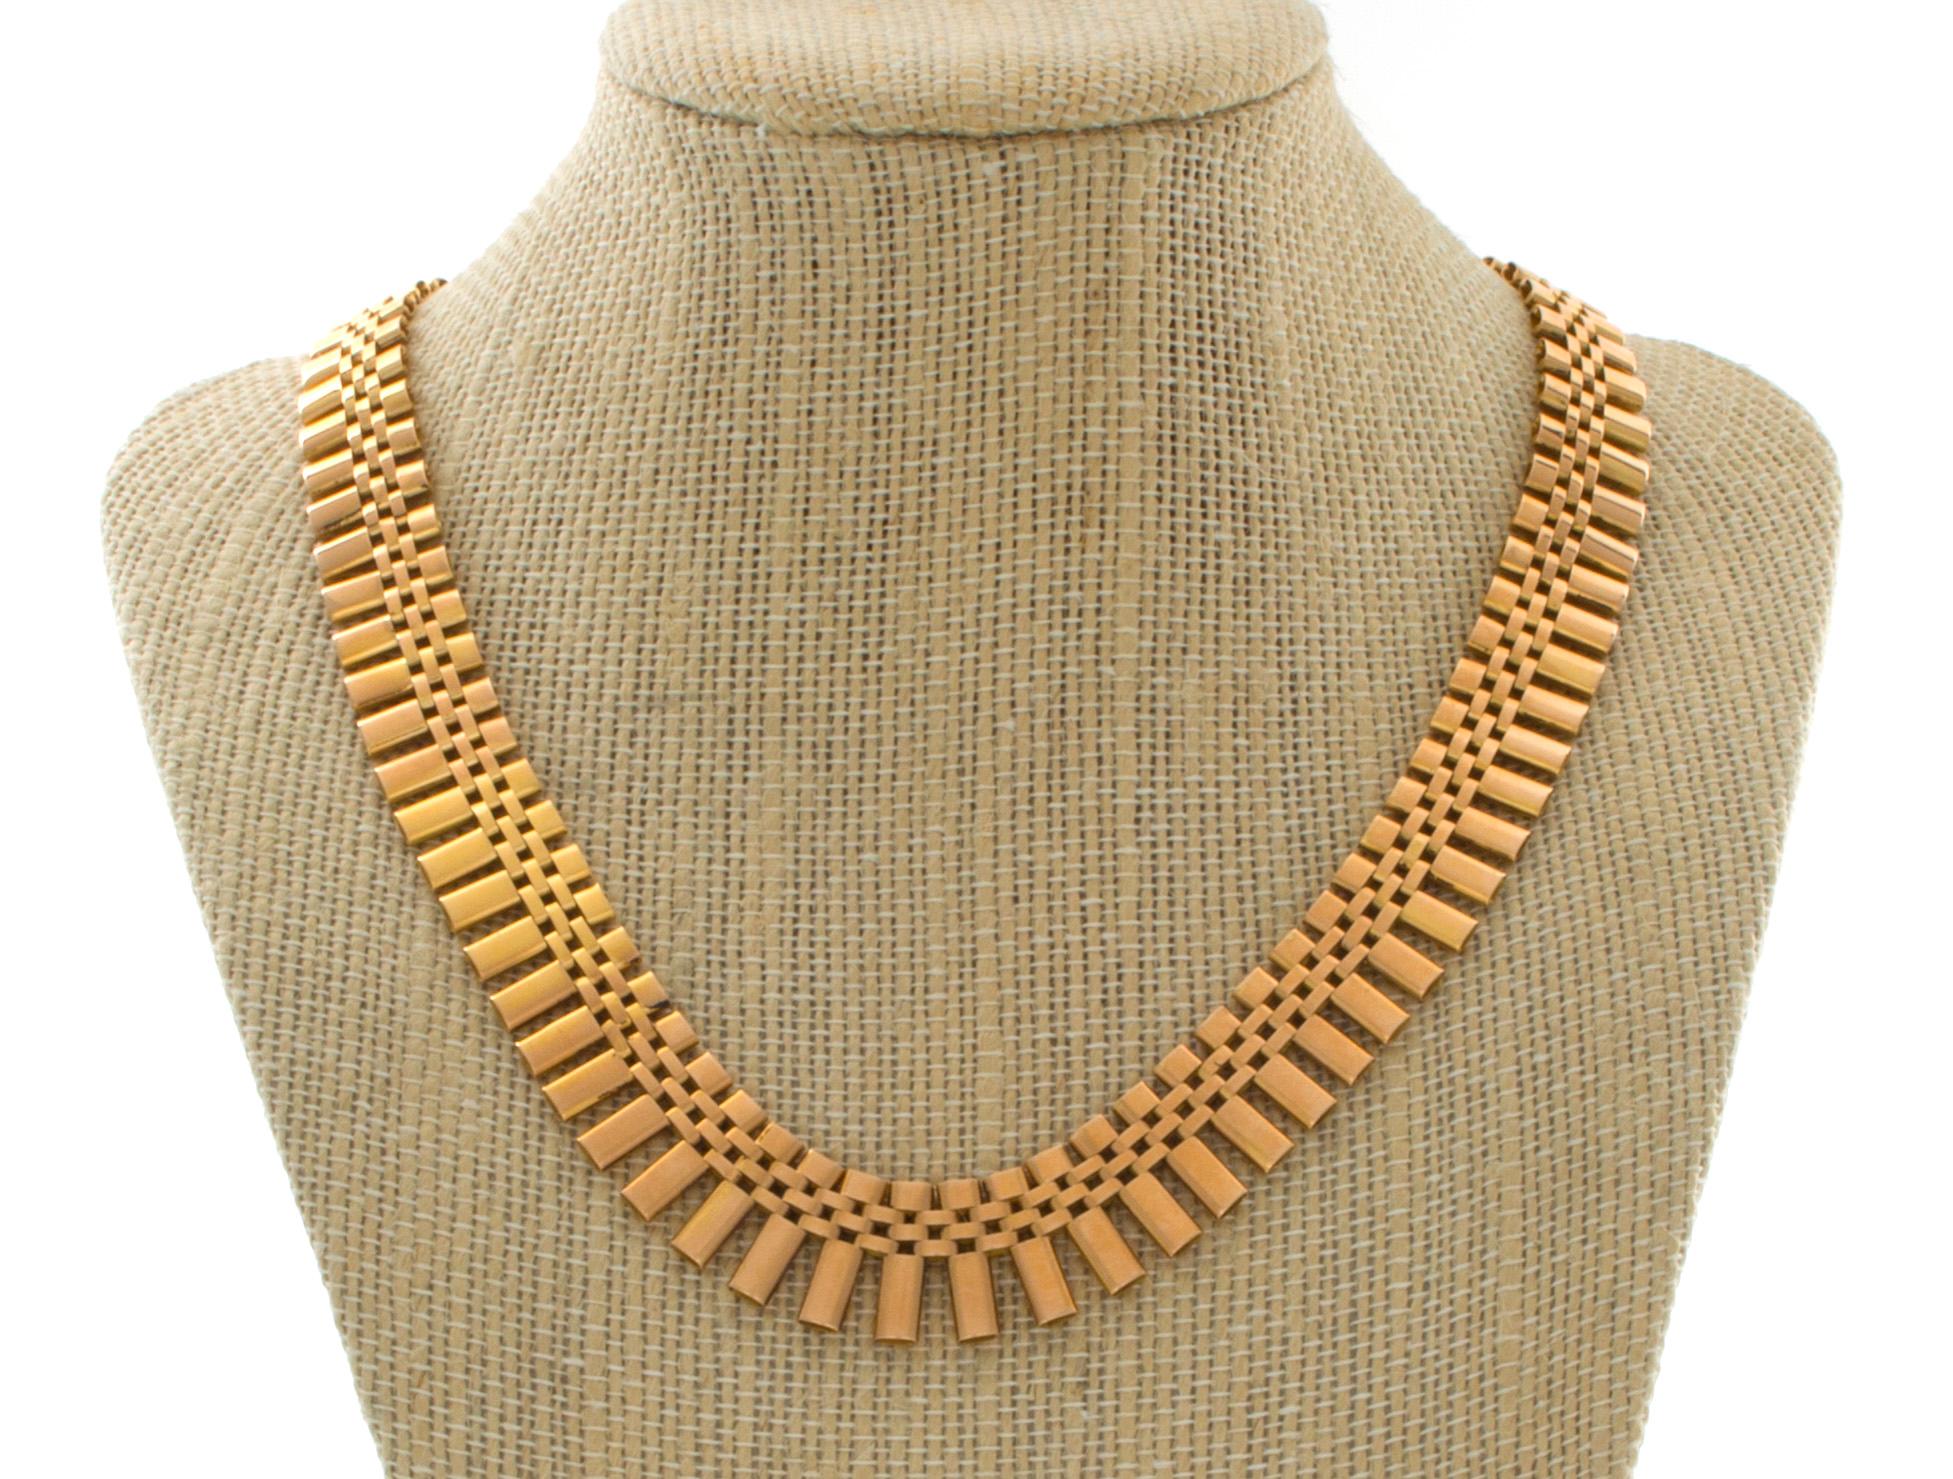 Italian 18 karat link necklace with the Assay marks 750 (18 Karat Gold) and the makers mark 8 VI (Unknown Maker from Vicenza) both in elongated hexagons which were used from 1944-1968. The links are made up of long oval links joined by three rows of